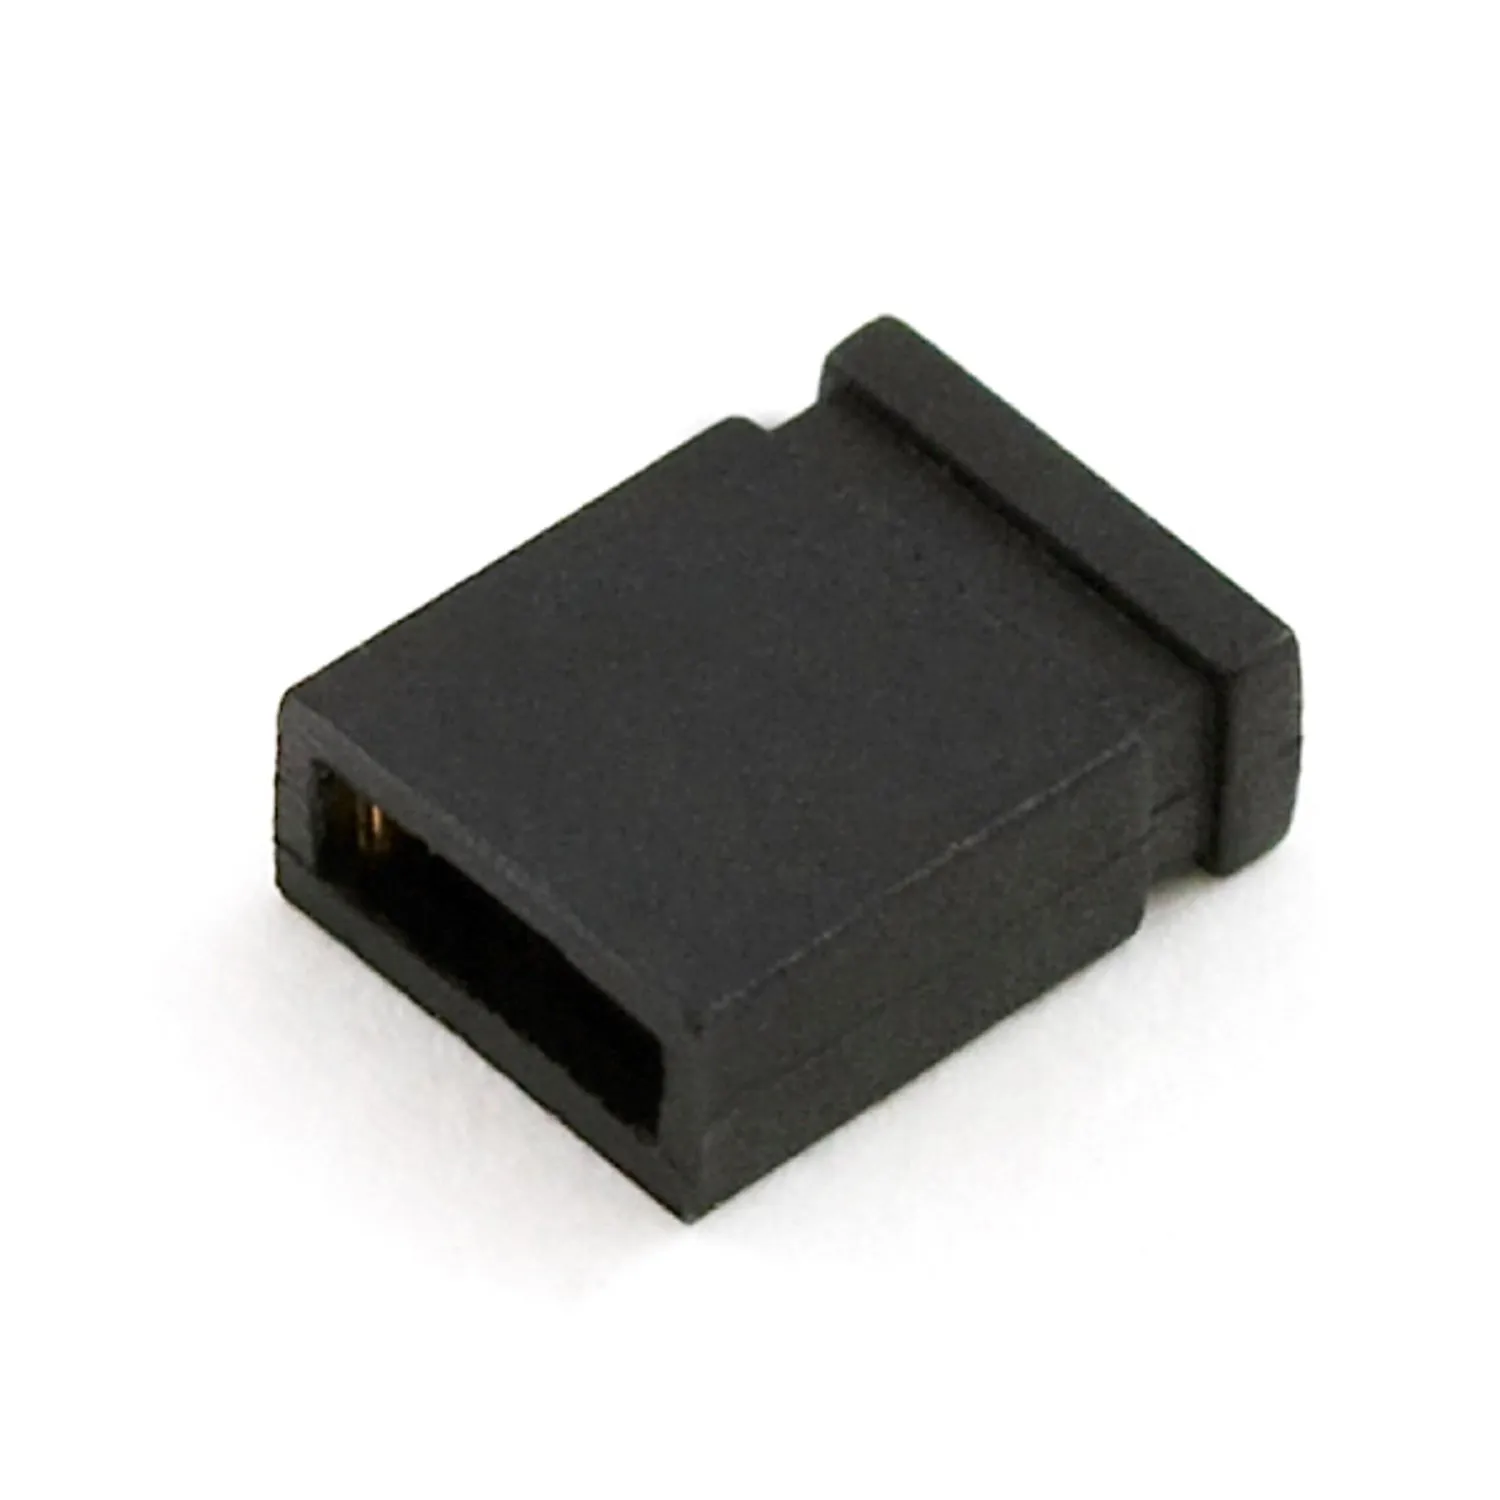 Photo of Jumper - 2 Pin